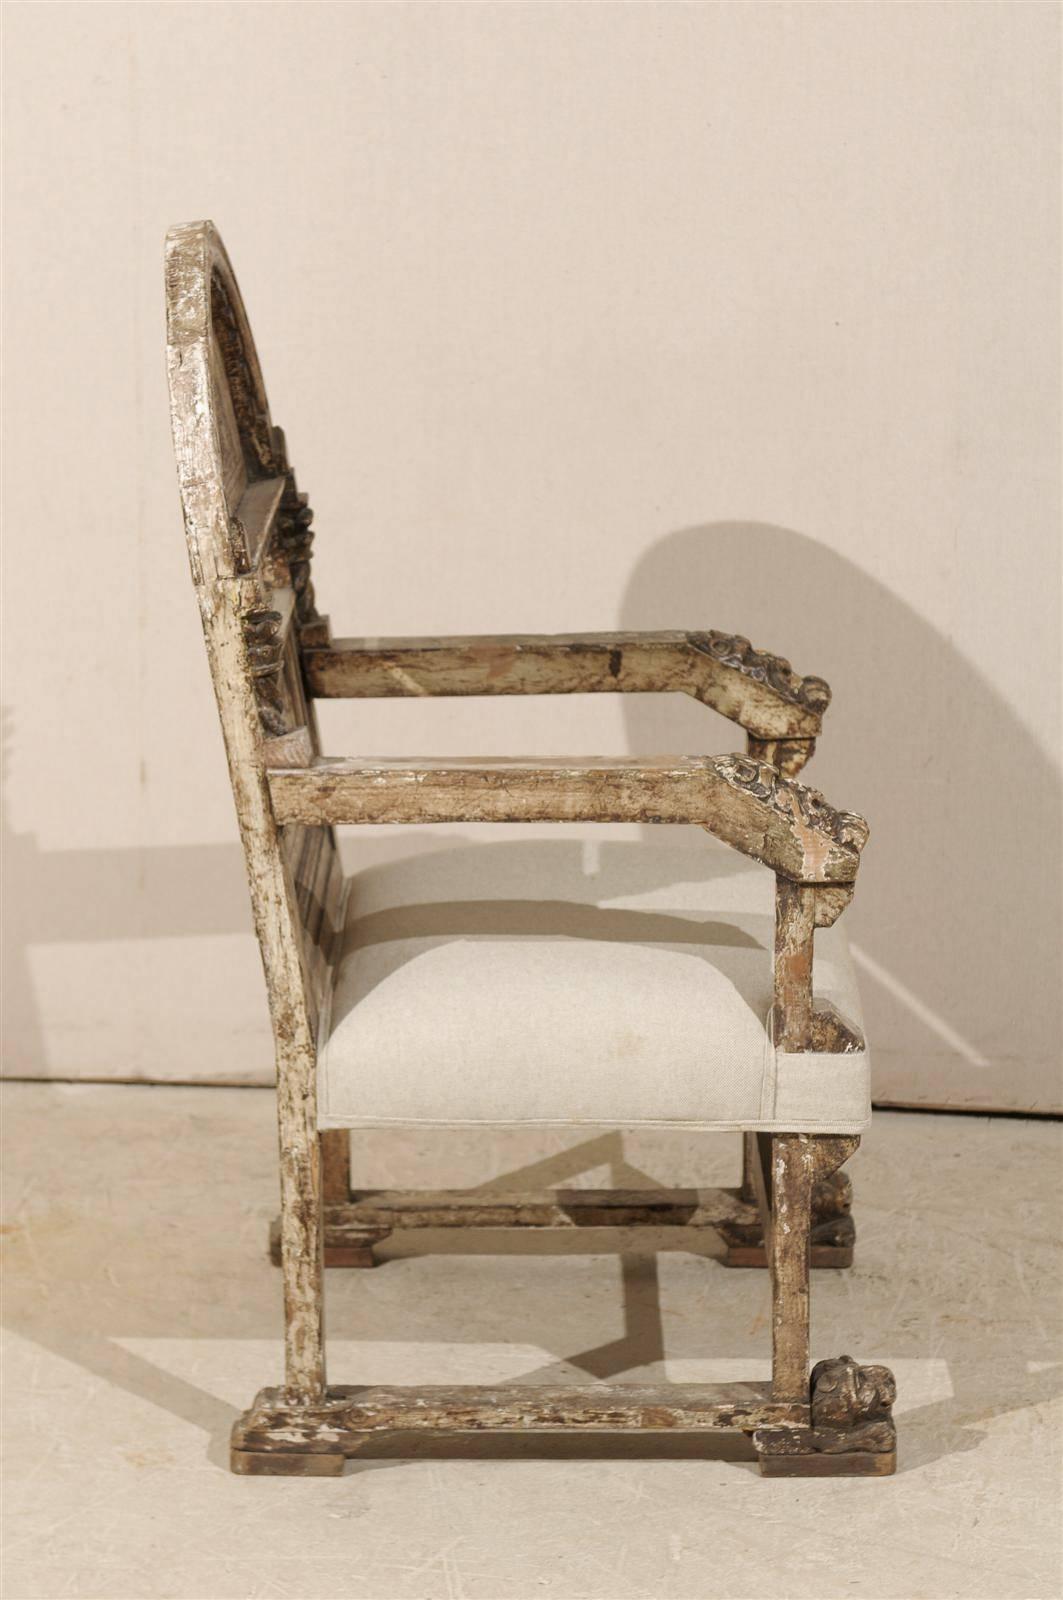 A Stately Italian Richly-Carved Wooden Chair with Elegant Aging, Early 19th C.  2